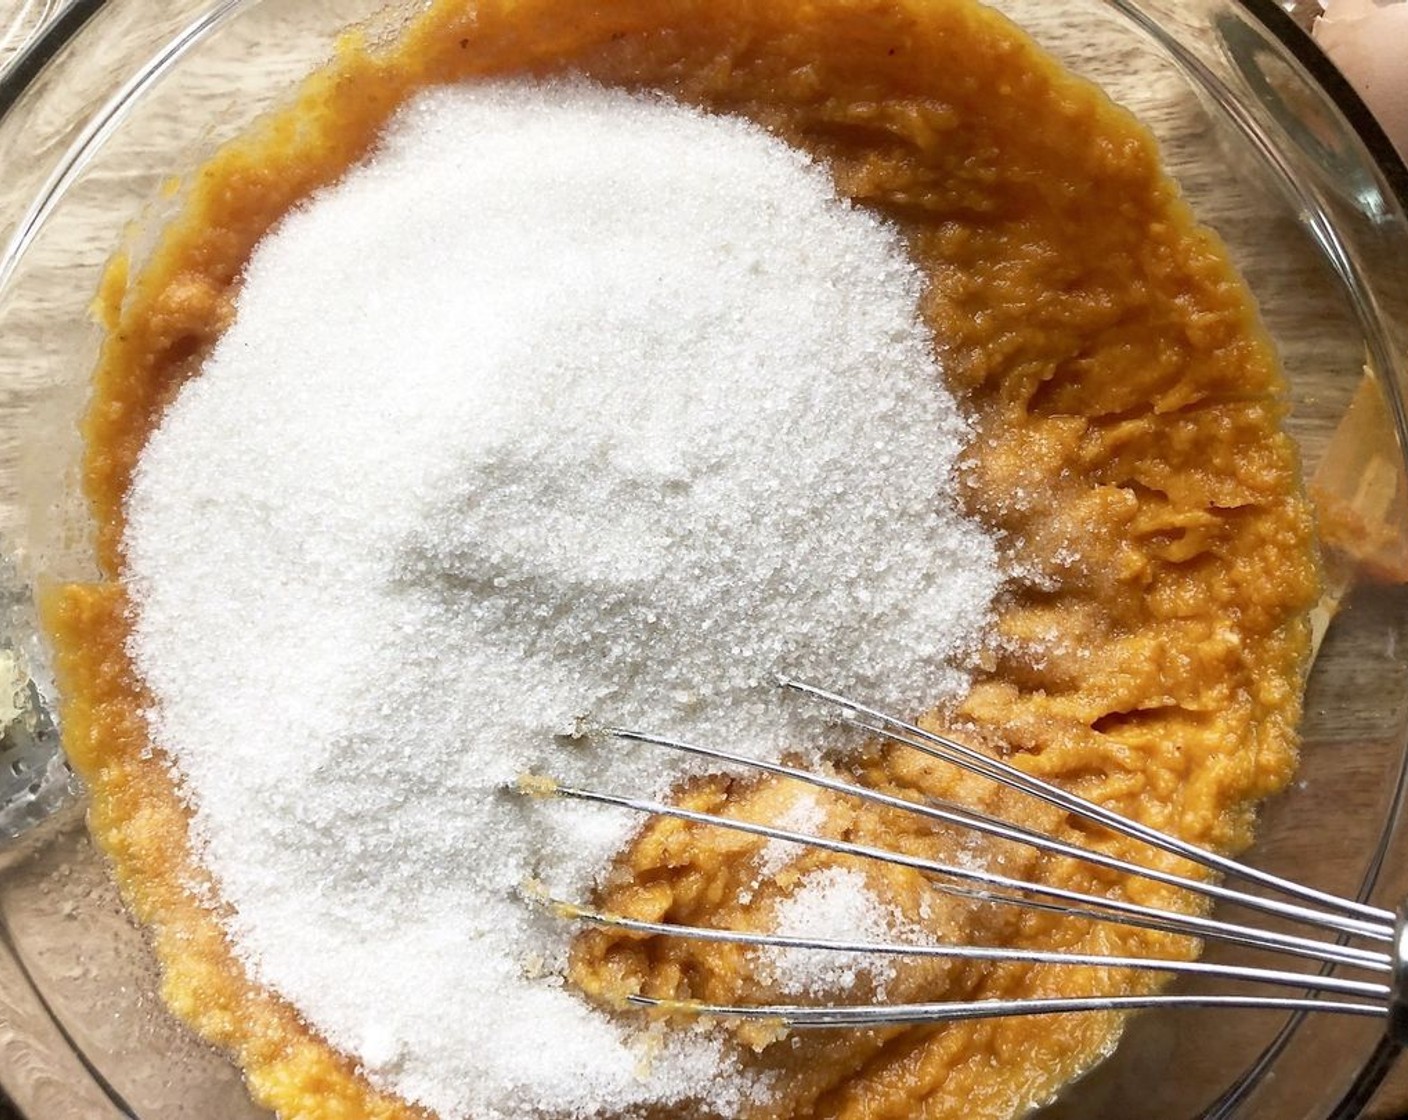 step 4 In a separate large bowl, whisk the 100% Pumpkin Purée (1 can), Granulated Sugar (1 1/2 cups), Eggs (2), and Fresh Ginger (1 1/2 Tbsp) until combined. Stream in the Extra-Virgin Olive Oil (1 cup), whisking constantly until mixture is homogeneous.